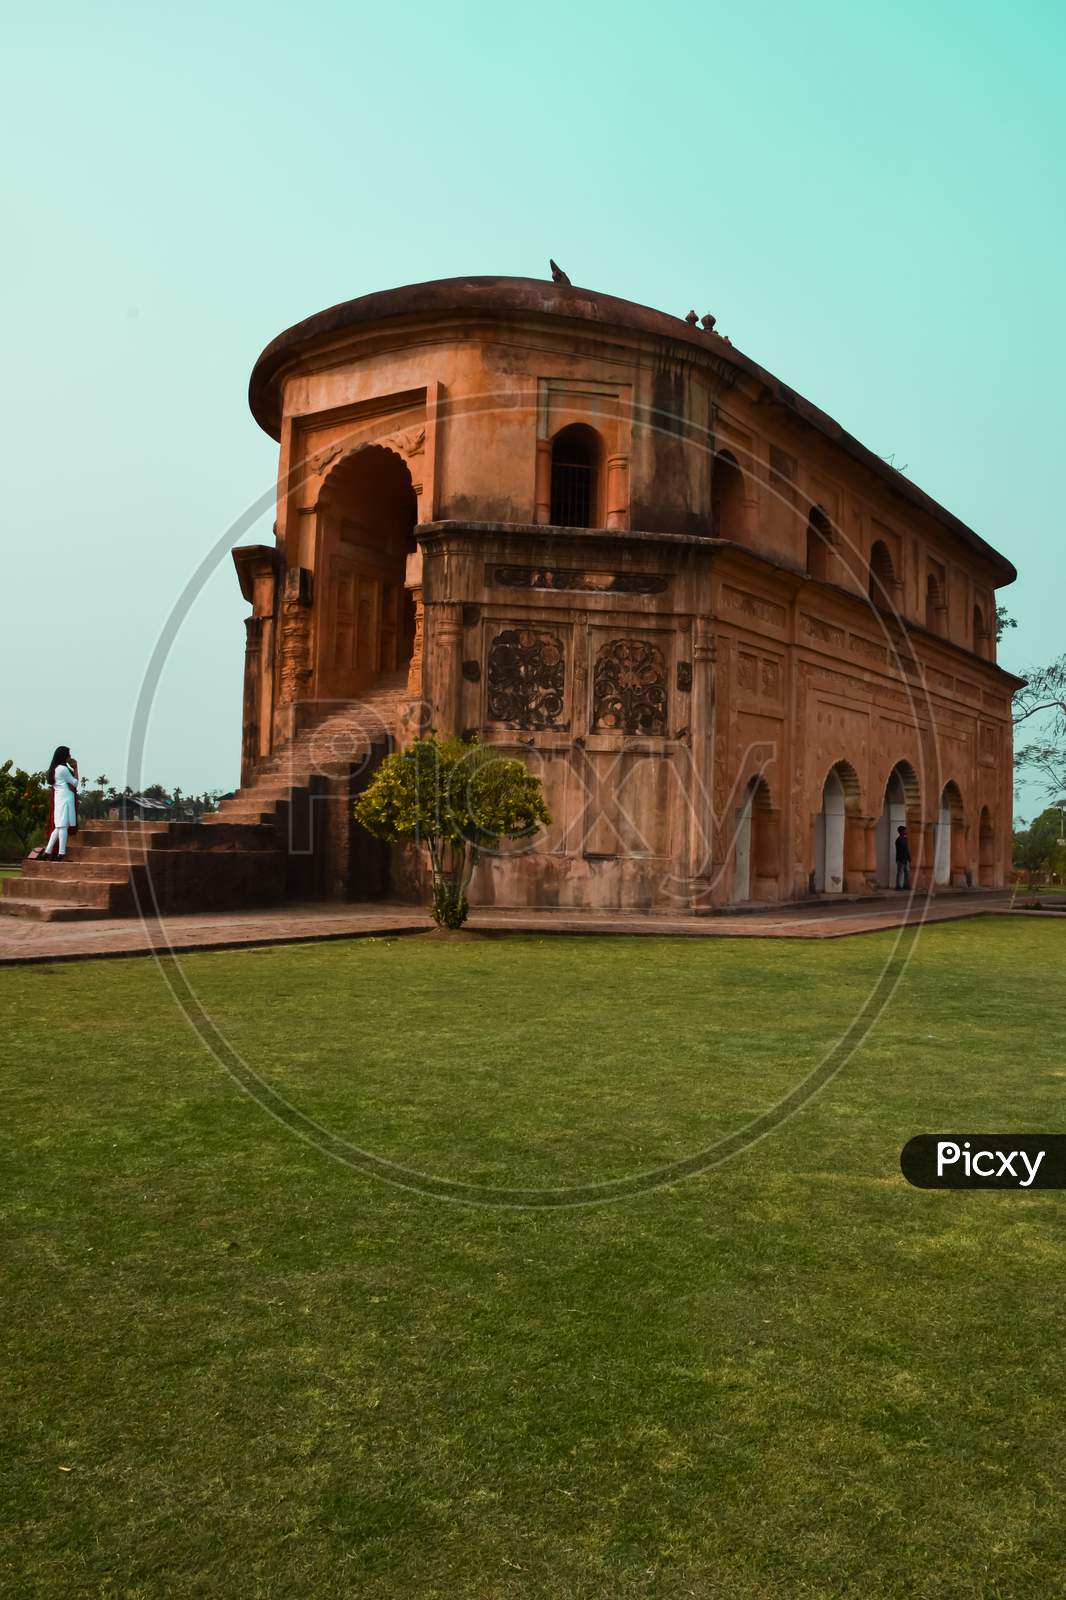 Rang Ghar "House of Entertainment" is a two-storeyed building which served as the royal sports-pavilion where kings and nobles were spectators at games and fights.